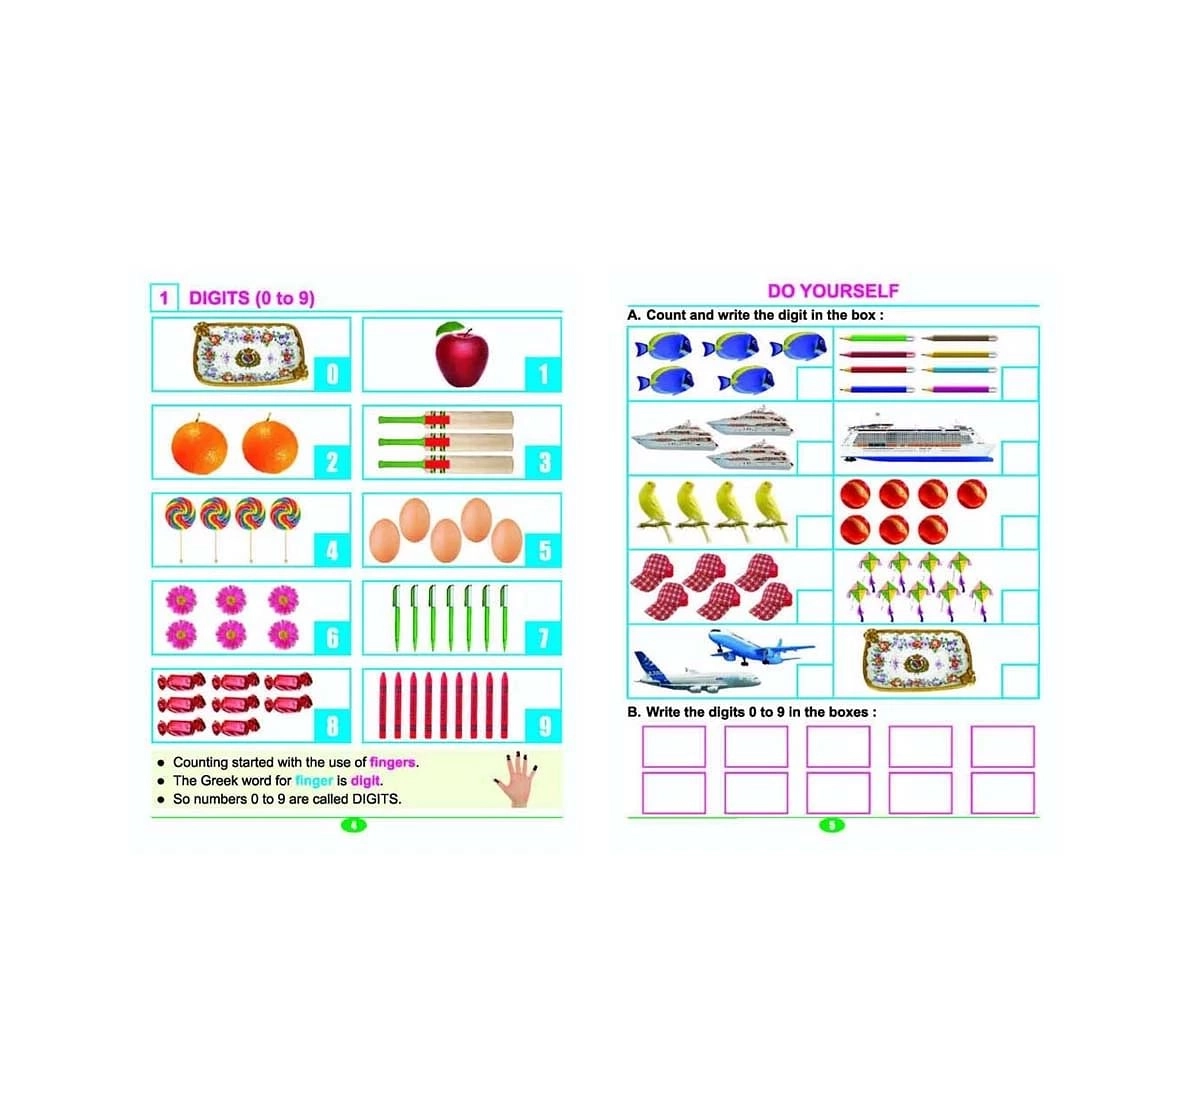 Dreamland Paper Back Mental Mathematics Set 1 Book of Part A and B for kids 4Y+, Multicolour